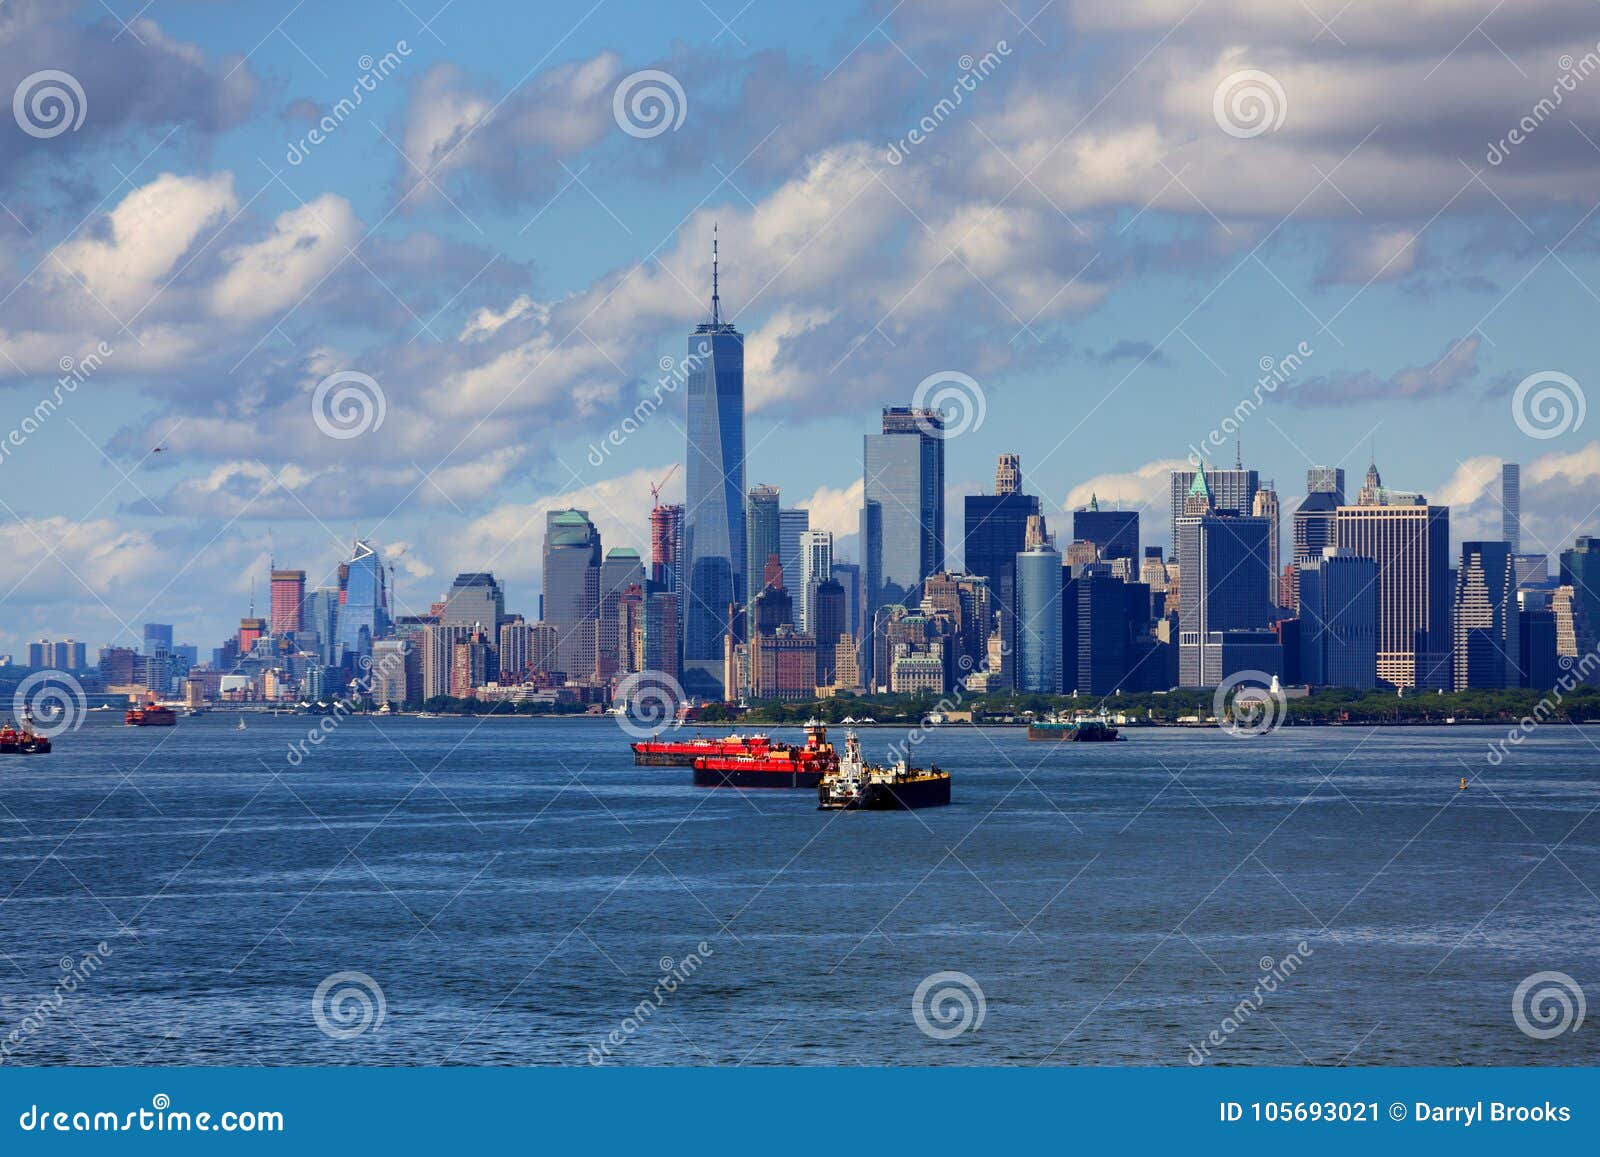 freighters in harbor with new york city in background